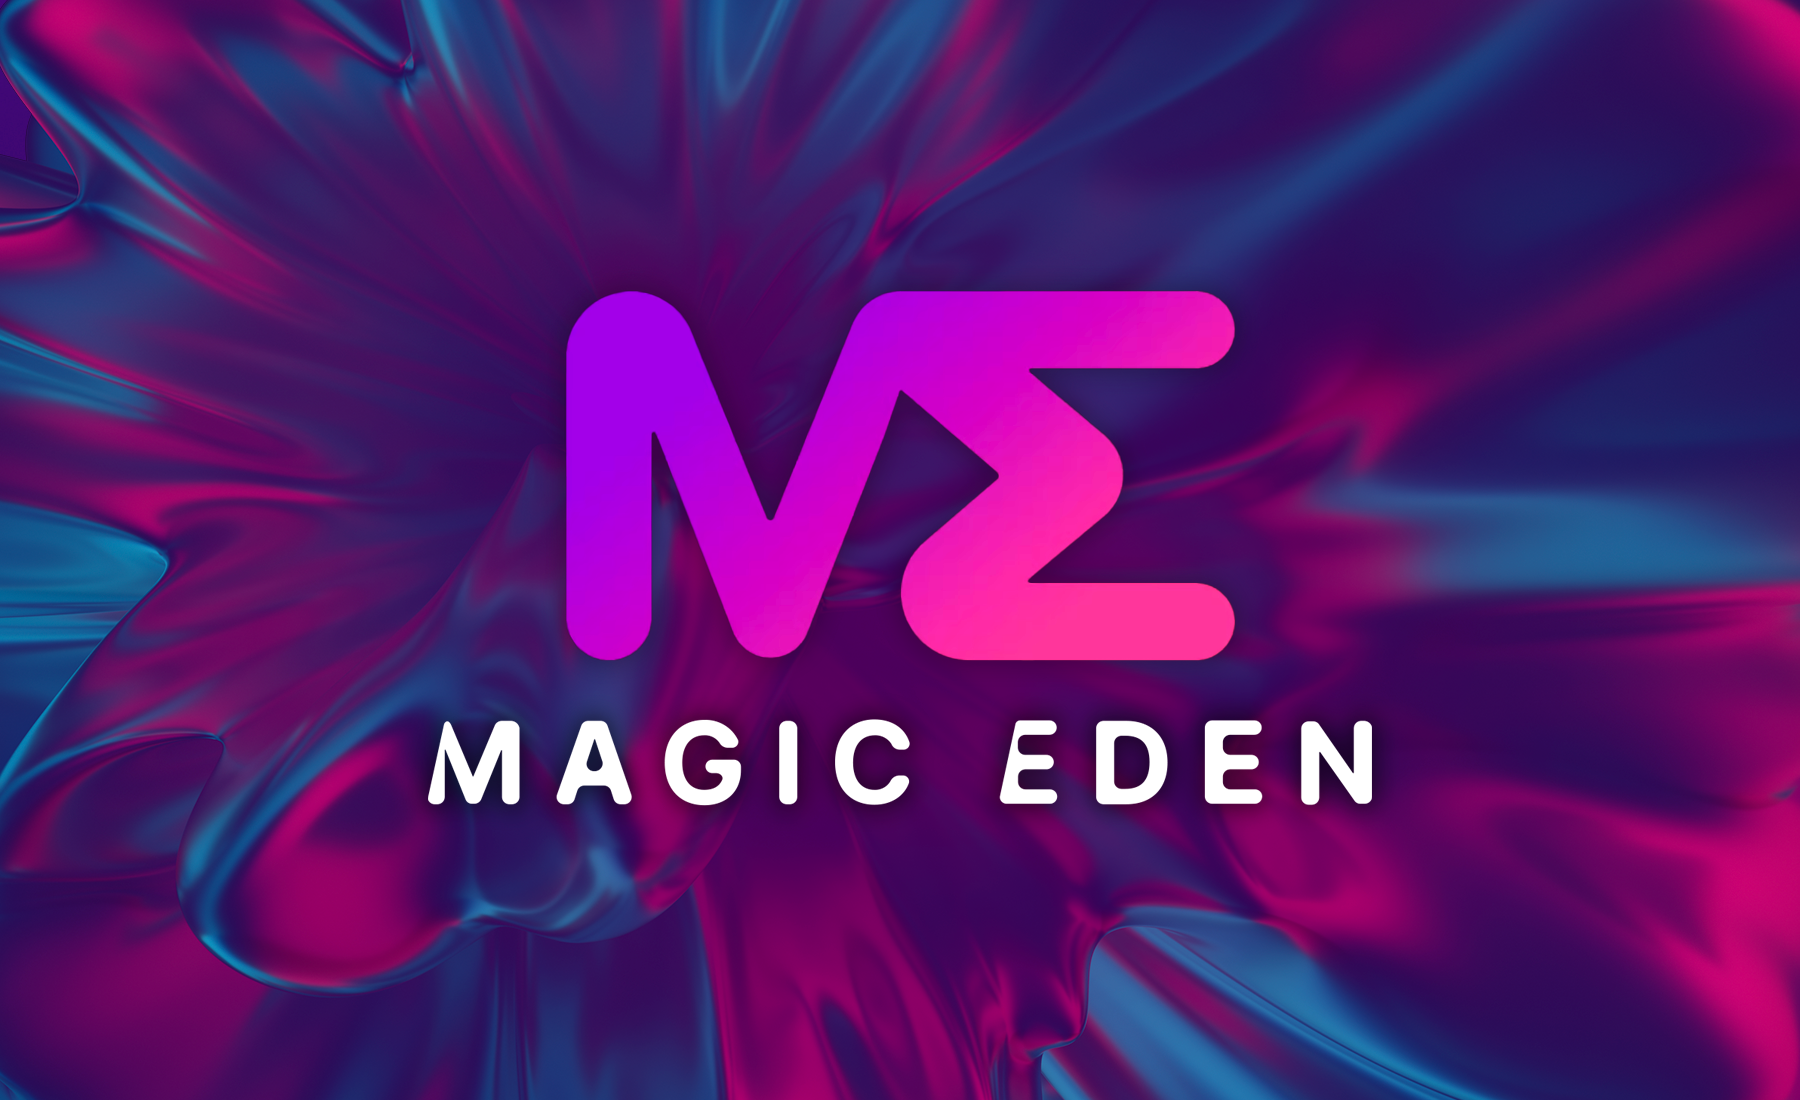 Sequoia Capital Invests Significantly On Solana-Based NFT Marketplace Magic Eden